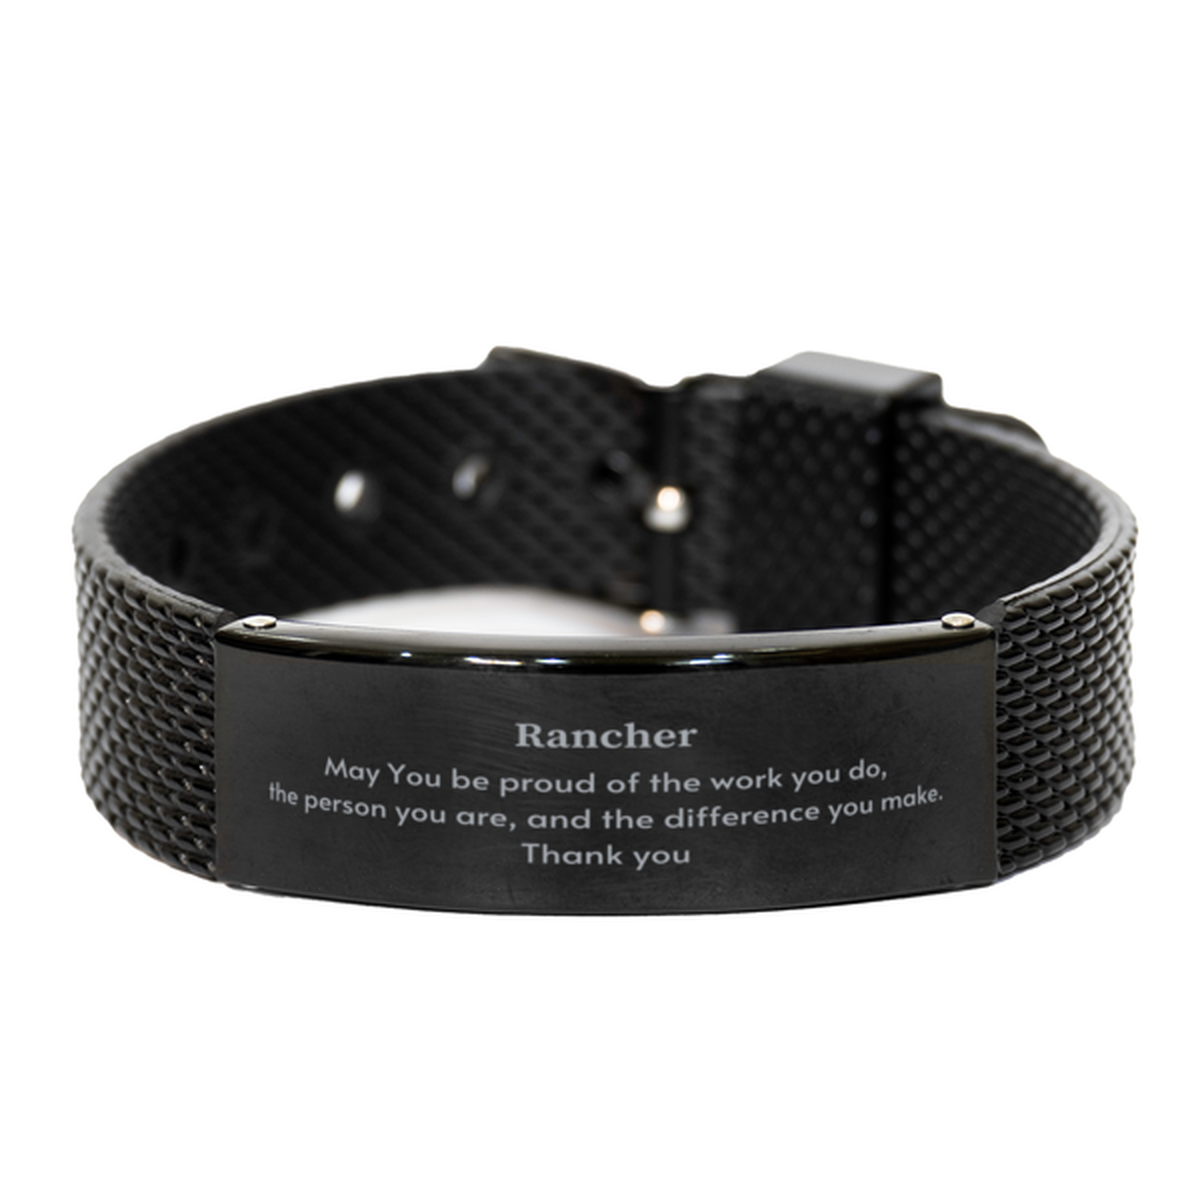 Heartwarming Black Shark Mesh Bracelet Retirement Coworkers Gifts for Rancher, Rancher May You be proud of the work you do, the person you are Gifts for Boss Men Women Friends